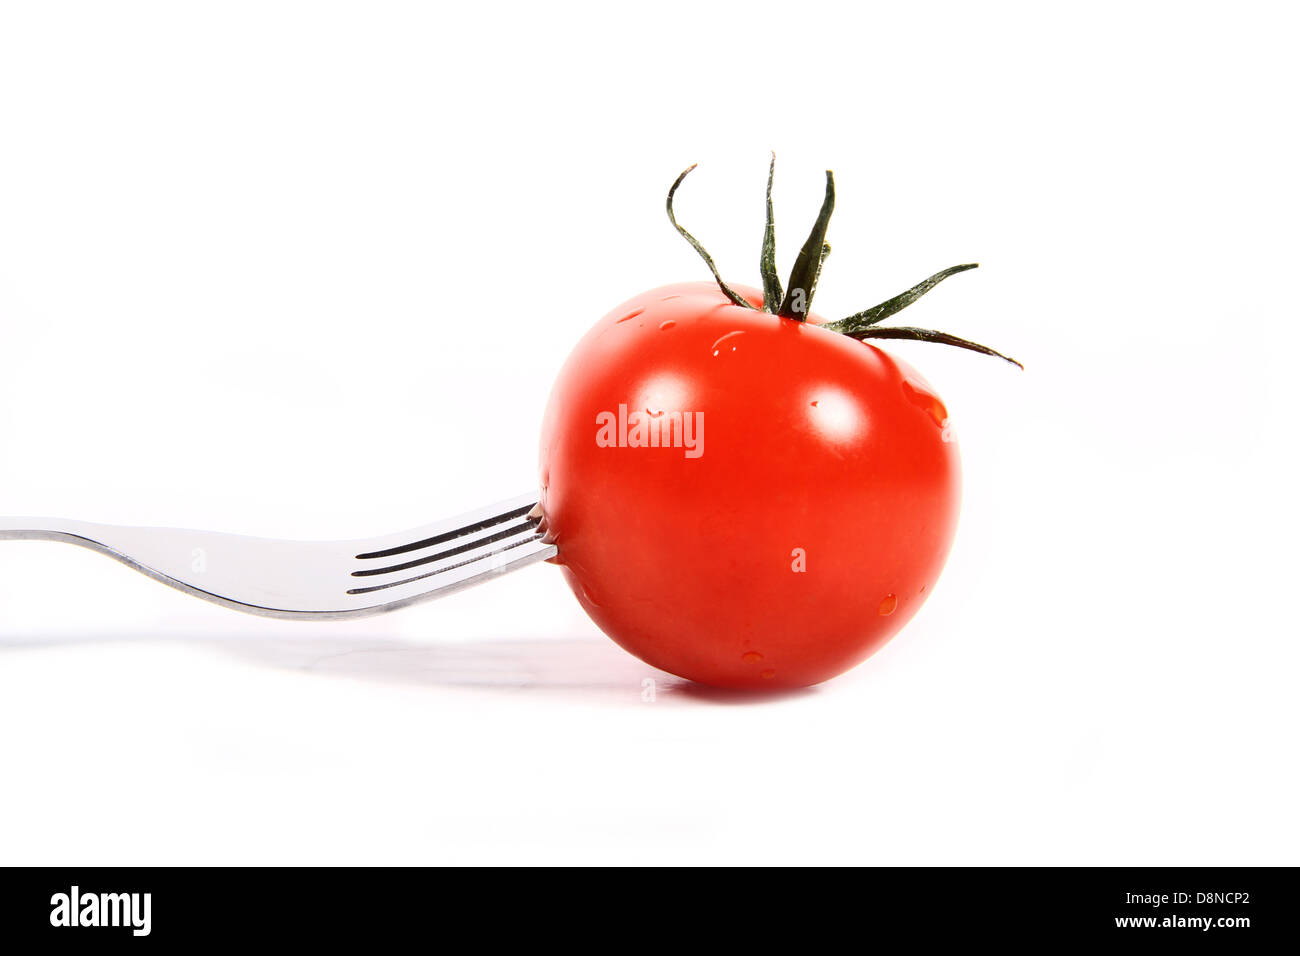 fresh red tomato on a fork Stock Photo